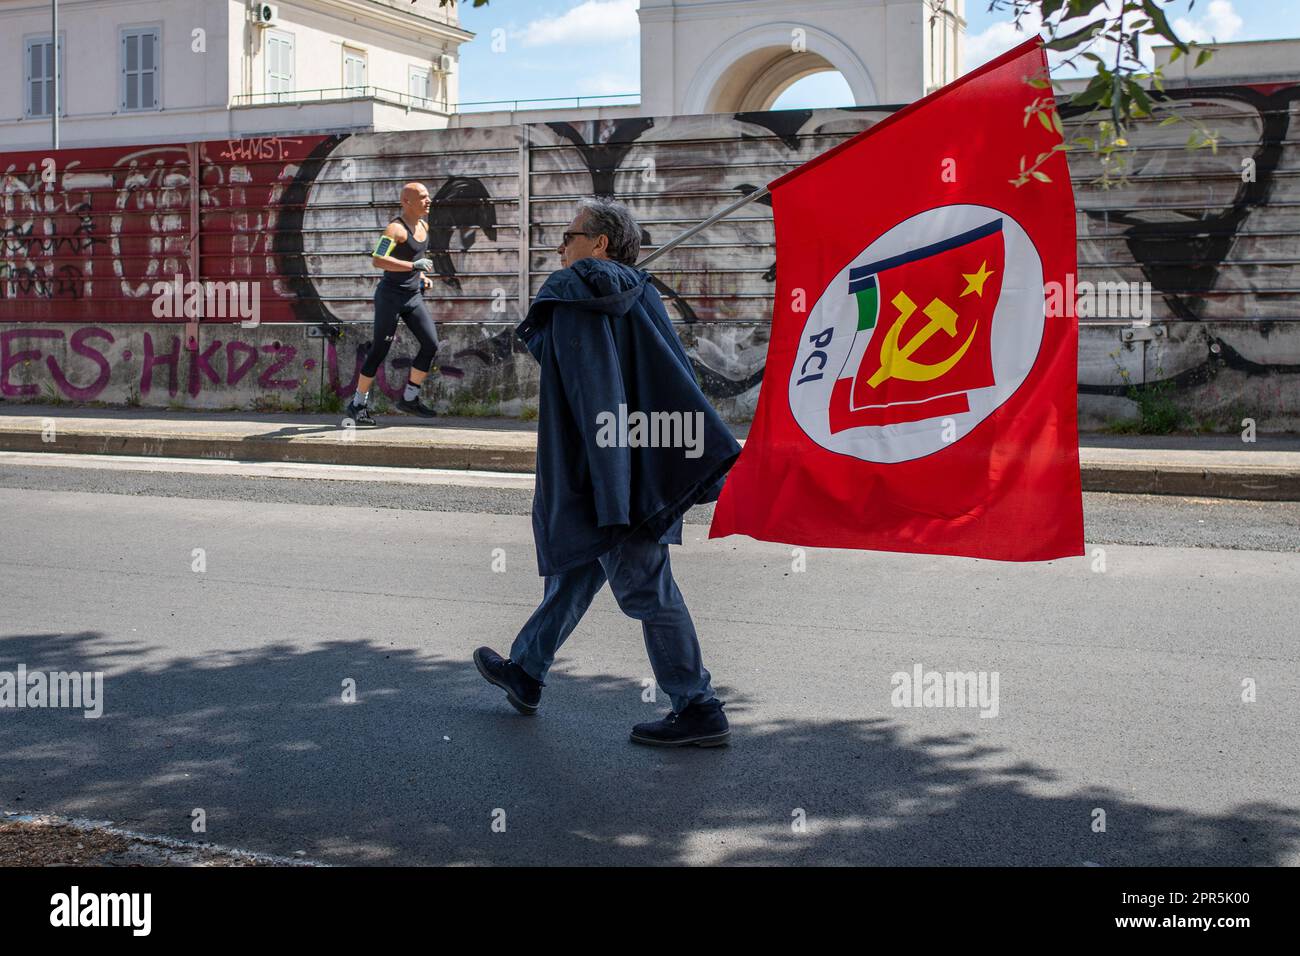 A man seen walking with the red flag of the Italian Communist Party during the demonstration. About 10 thousand demonstrators took part during the parade organized by the ANPI (National Association of Partisans of Italy) in Rome on the occasion of the 78th anniversary of the Liberation from Nazi-fascism. Starting from Largo Bompiani, they crossed the neighborhoods of Tor Marancia, Garbatella and Ostiense, until they arrived at Porta San Paolo. The demonstration ended in Piazzale Ostiense with speeches by political figures, trade unions and the testimonies of those who were partisans during the Stock Photo